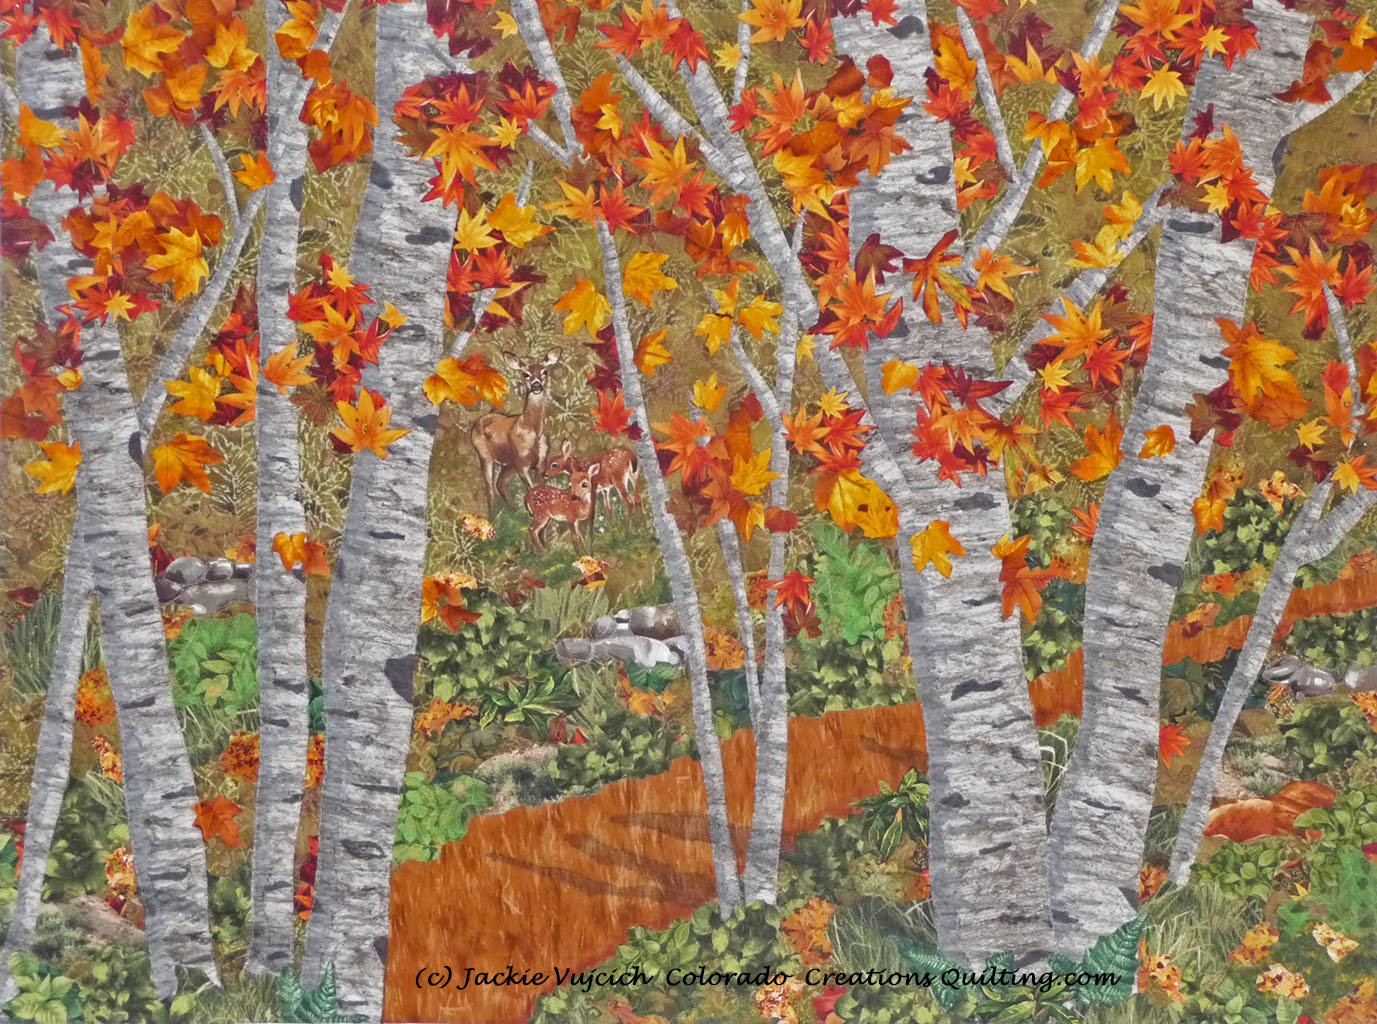 Among the Trees quilt shows a dirt path among aspen trees with lush foliage and gold/rust leaves.  A family of dear are grazing in the meadow available at Colorado Creations Quilting